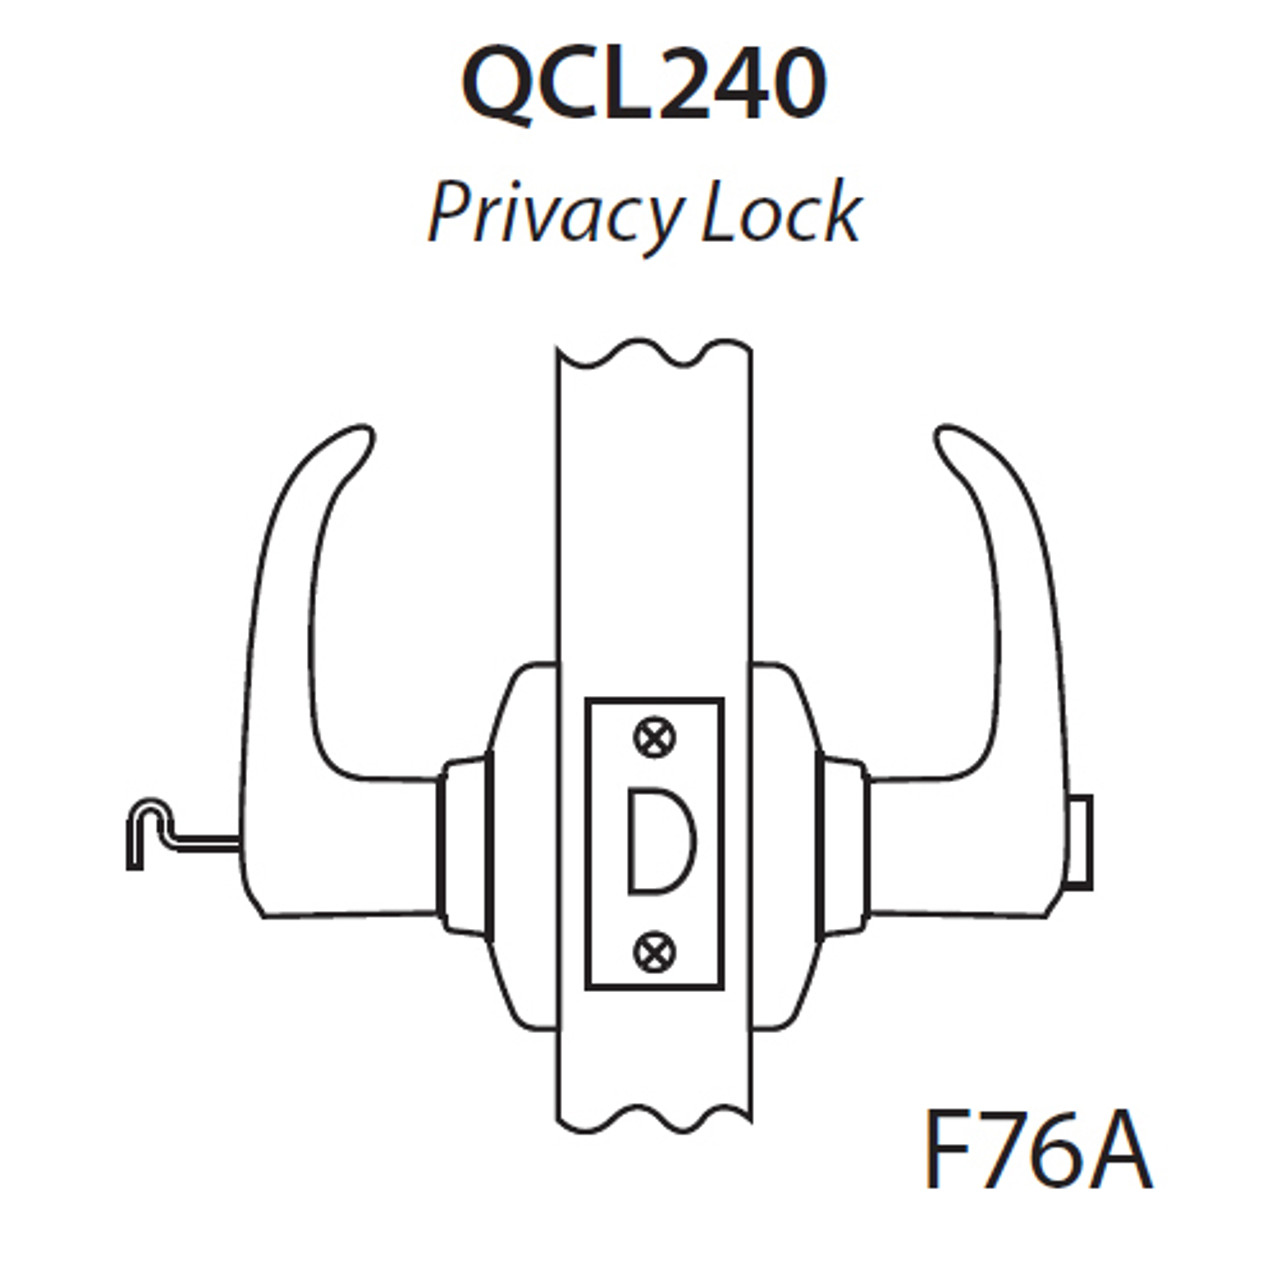 QCL240M613NS8NOS Stanley QCL200 Series Cylindrical Privacy Lock with Summit Lever in Oil Rubbed Bronze